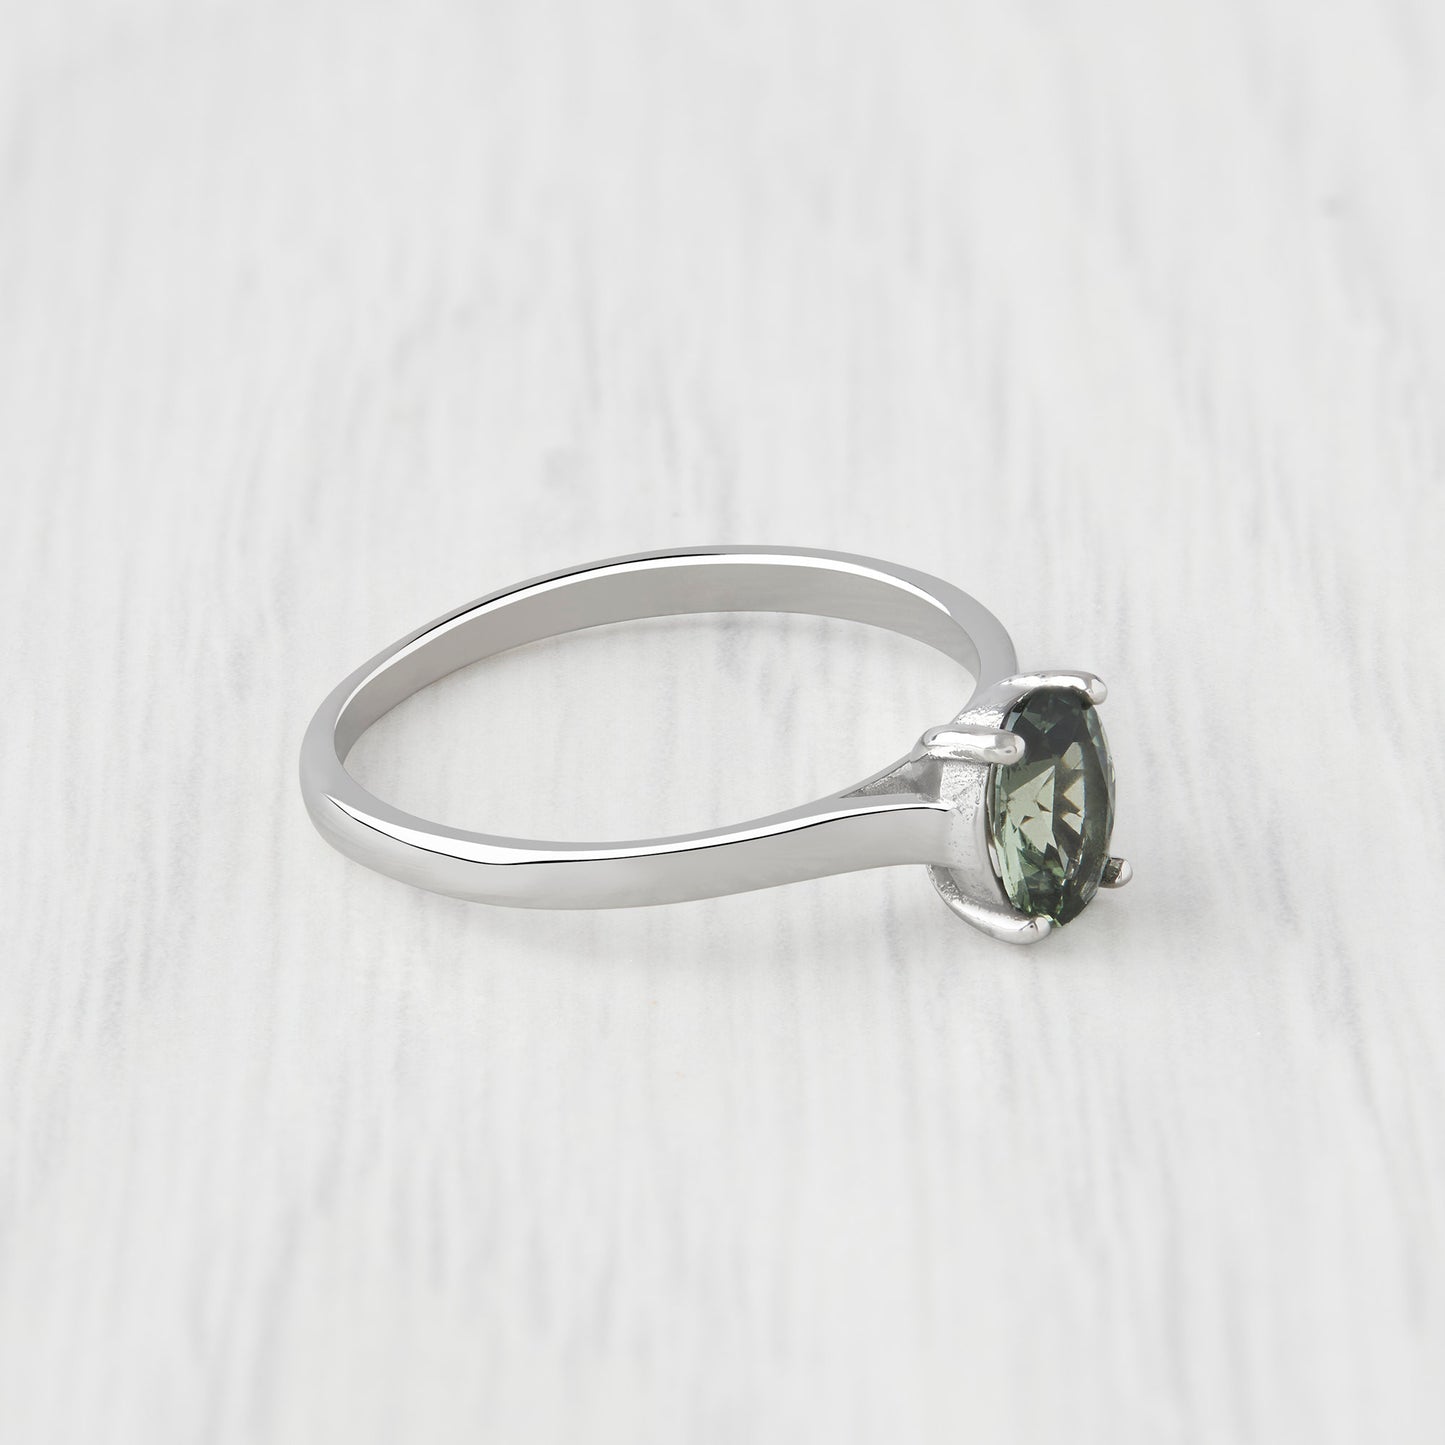 0.7ct Oval Cut Green Sapphire Solitaire cathedral ring in Titanium or White Gold